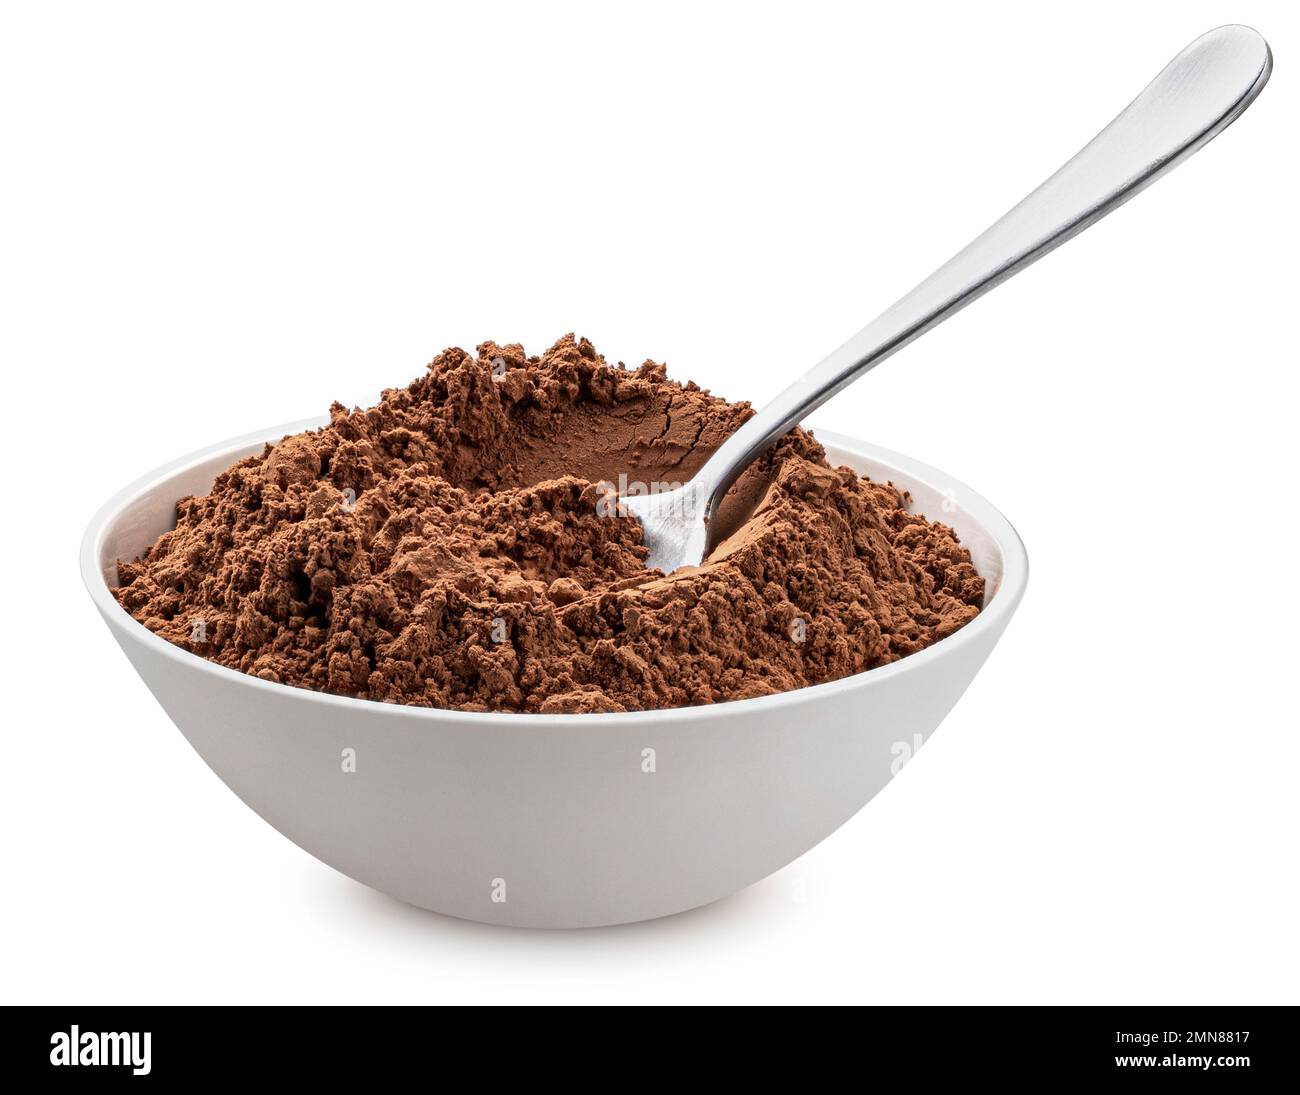 Cocoa powder isolated on white background, full depth of field Stock Photo